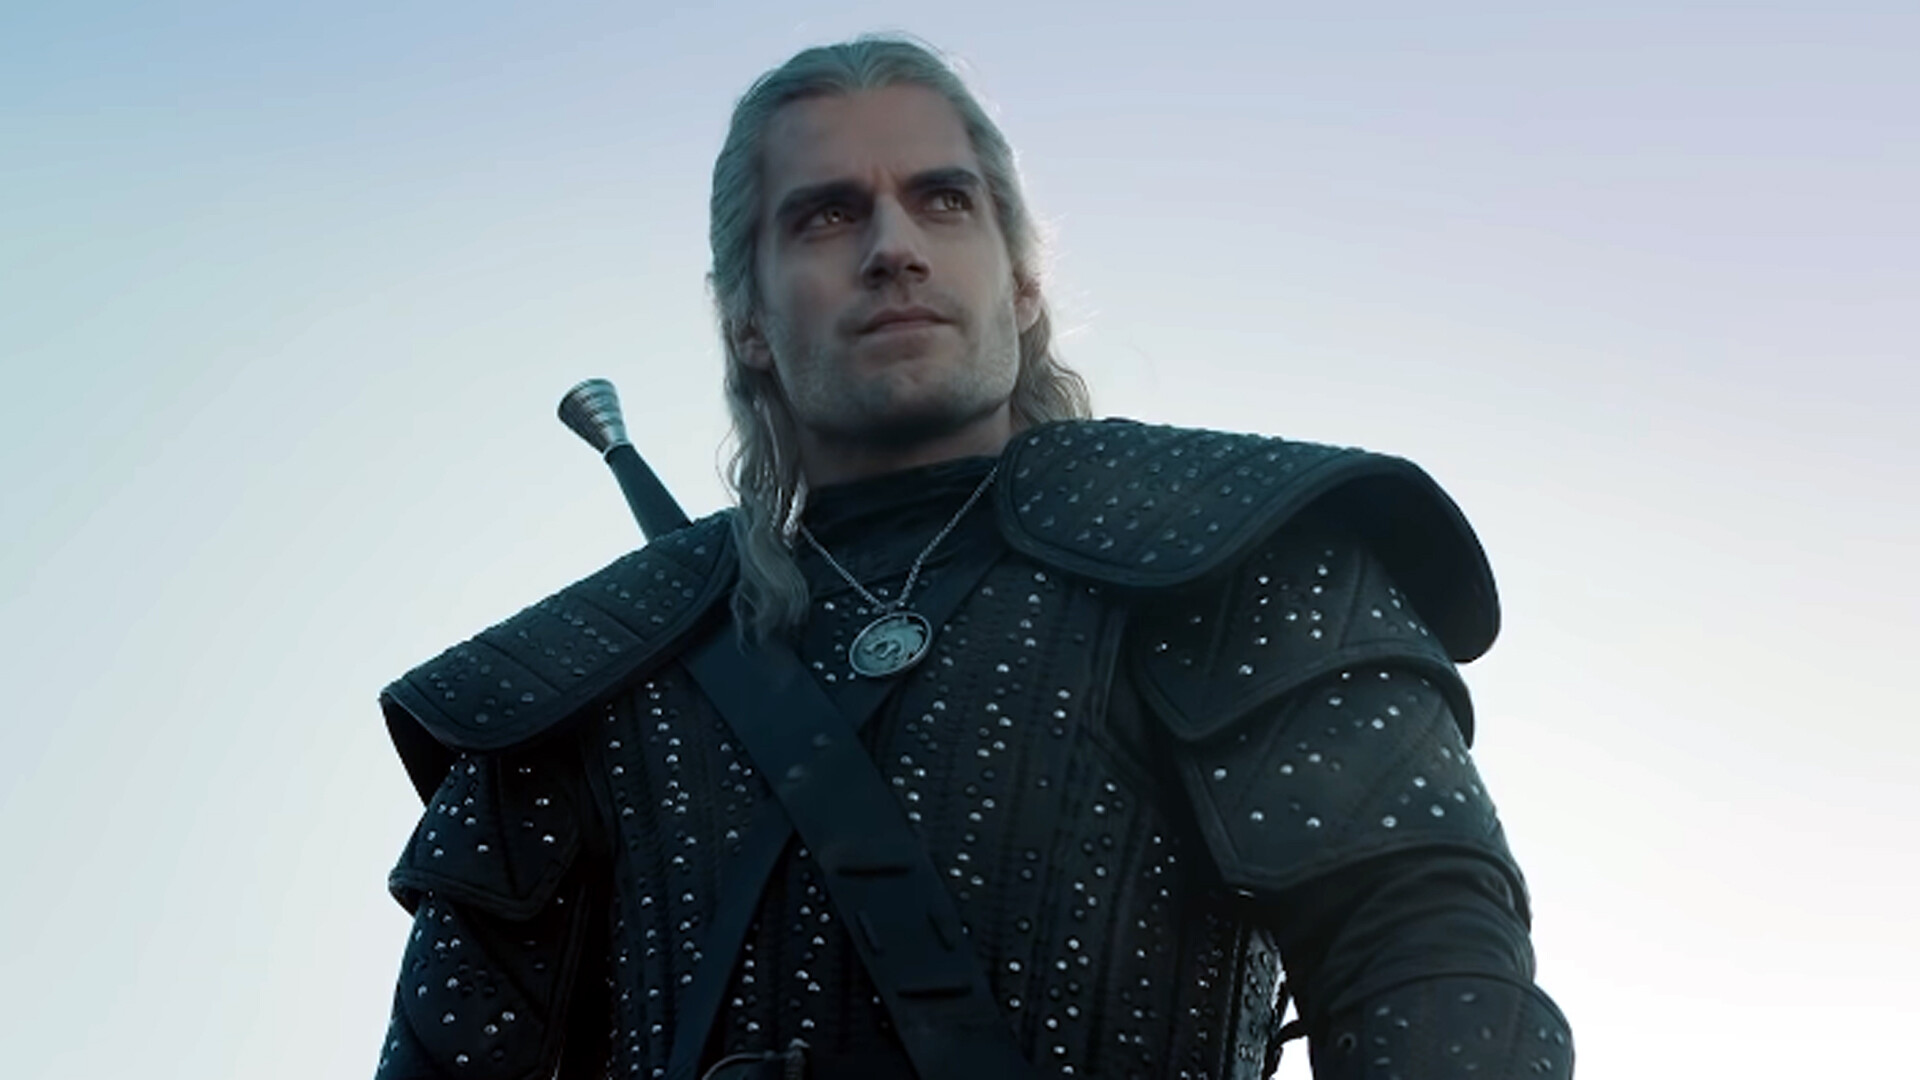 The Witcher Season 2: Henry Cavill as Geralt of Rivia, a magically enhanced monster hunter. 1920x1080 Full HD Background.